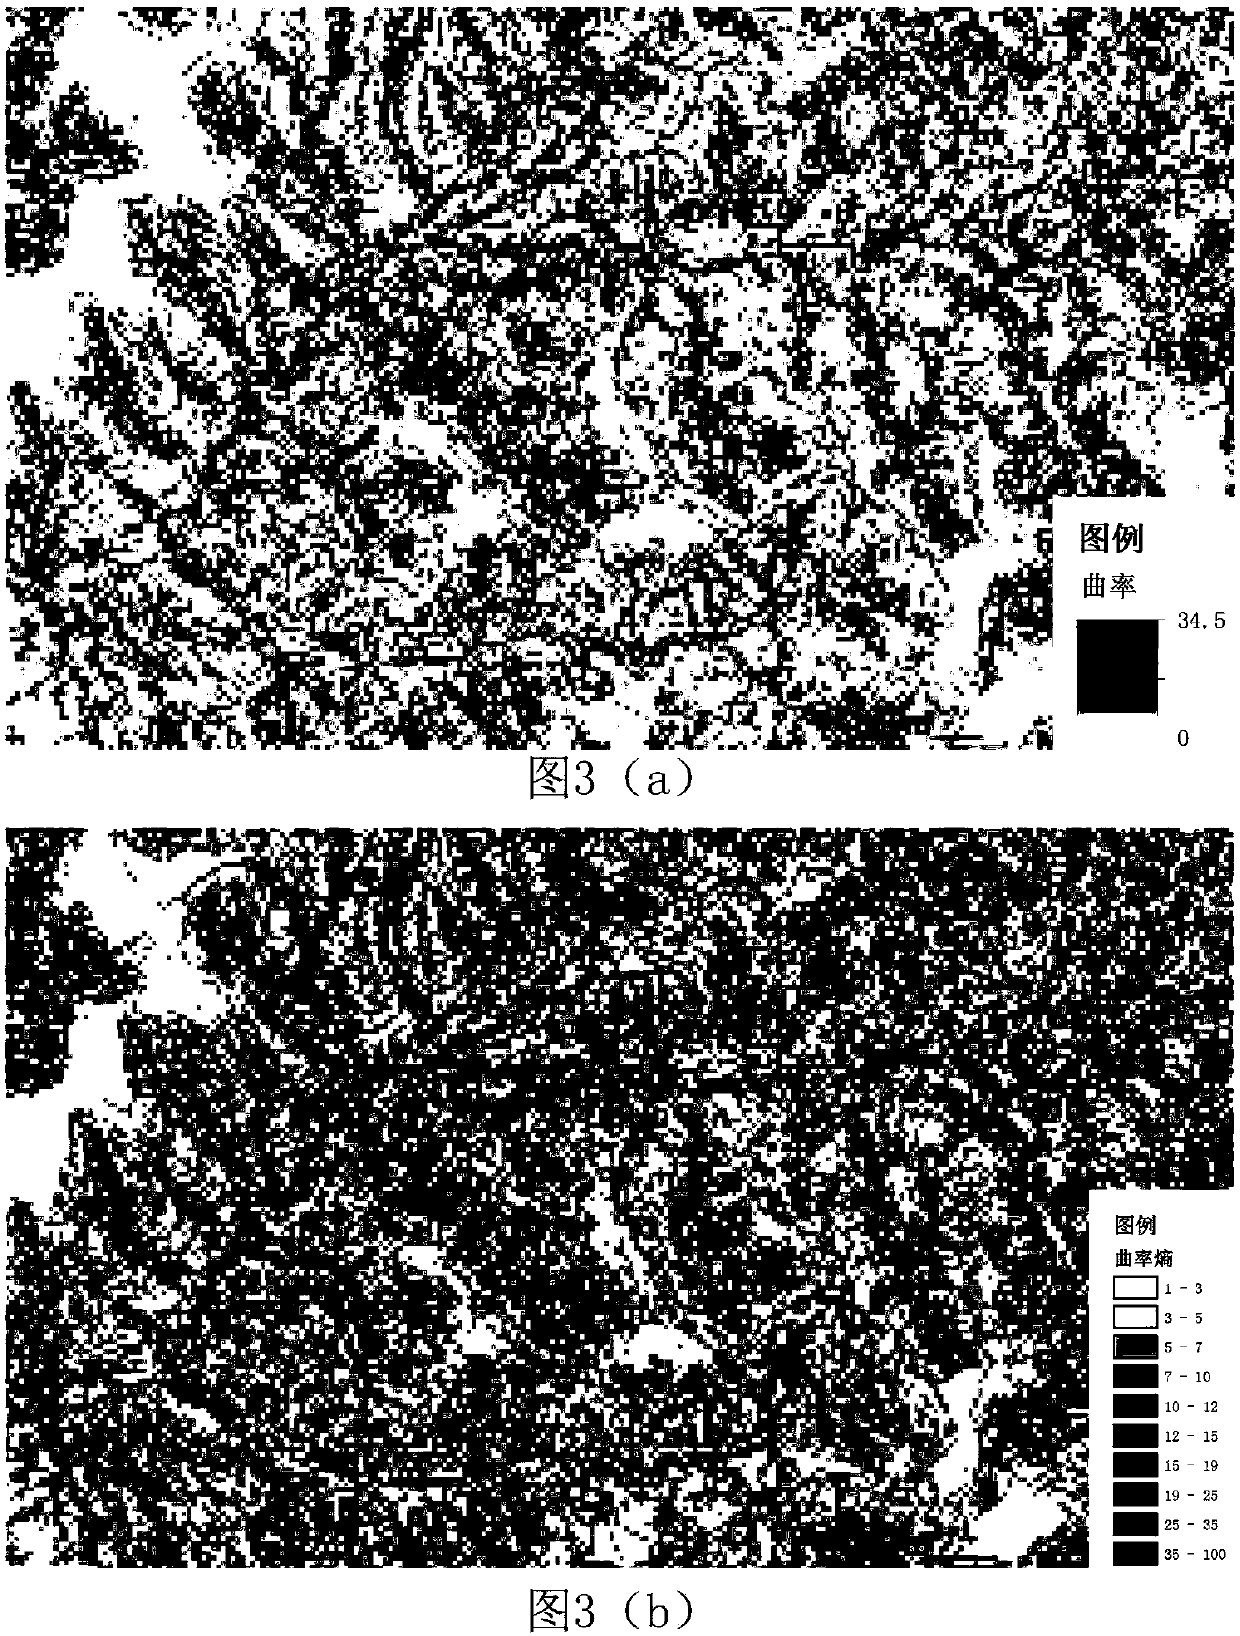 3D Terrain Surface Optimization Method Based on Local Curvature Entropy and Quadtree Structure